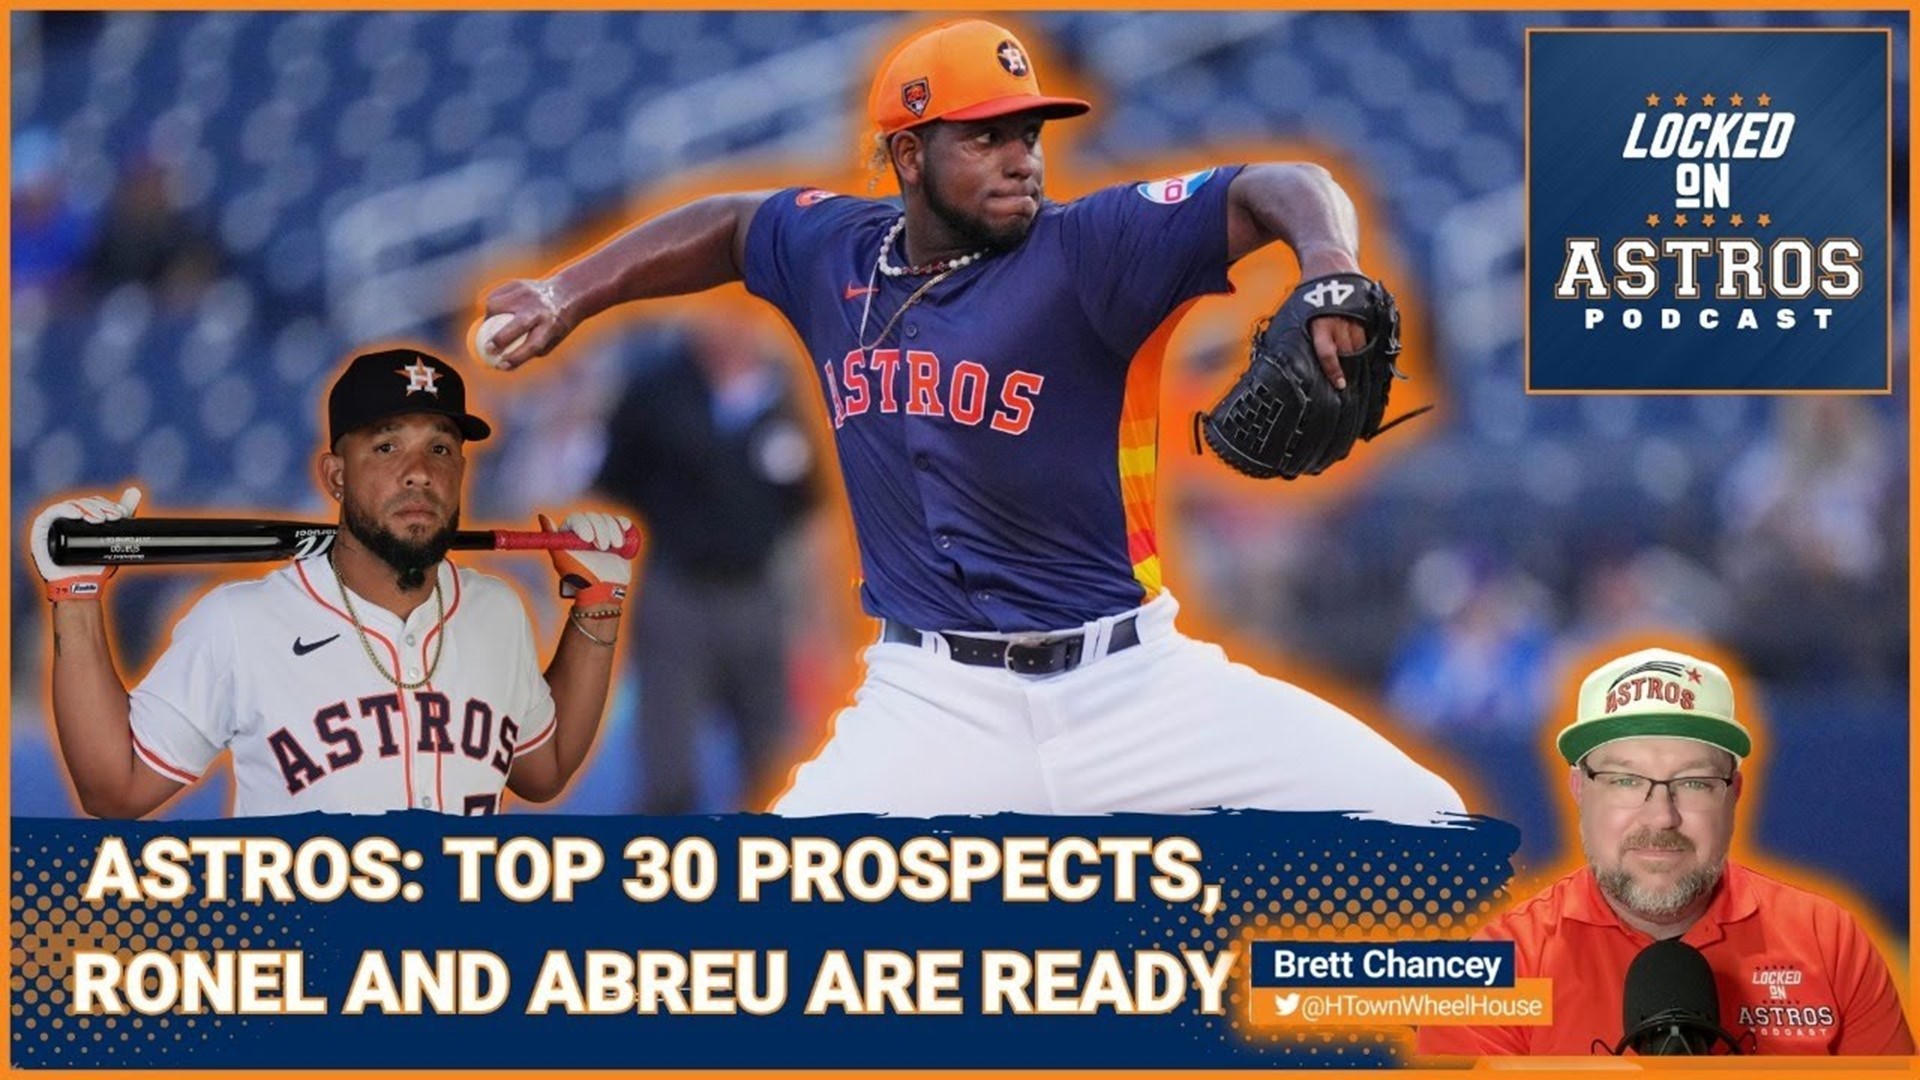 Astros Updated Top 30 Prospect list, Confidence grows for Blanco and